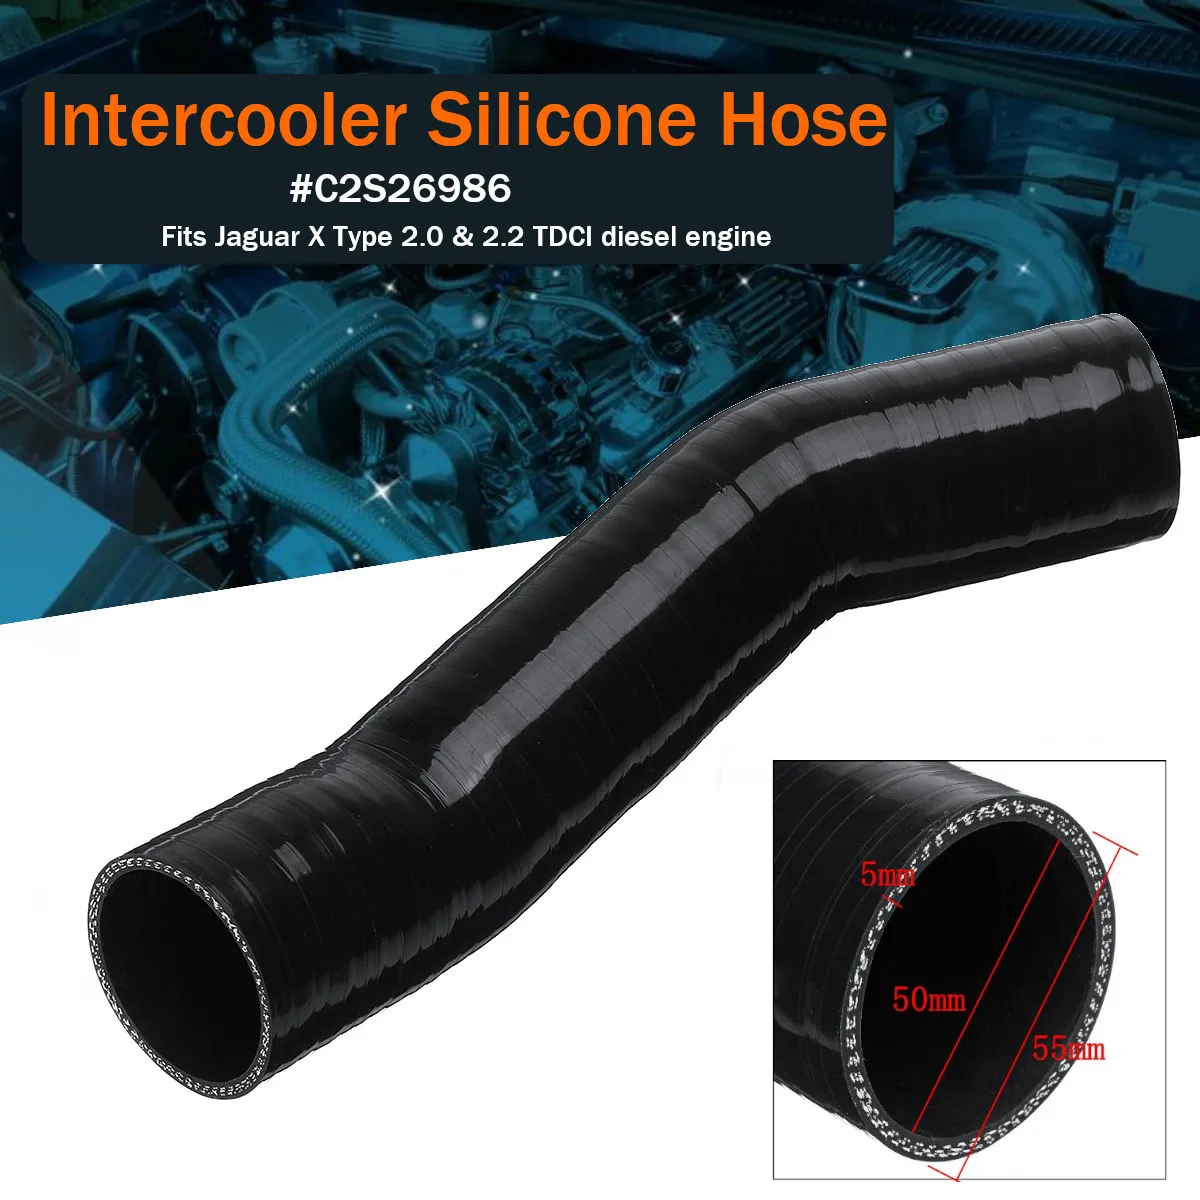 

Black Turbo Car Boost Hose Silicone Rubber Pipe Intercooler For JAGUAR X-TYPE 2.0 and 2.2 TDCI C2S26986